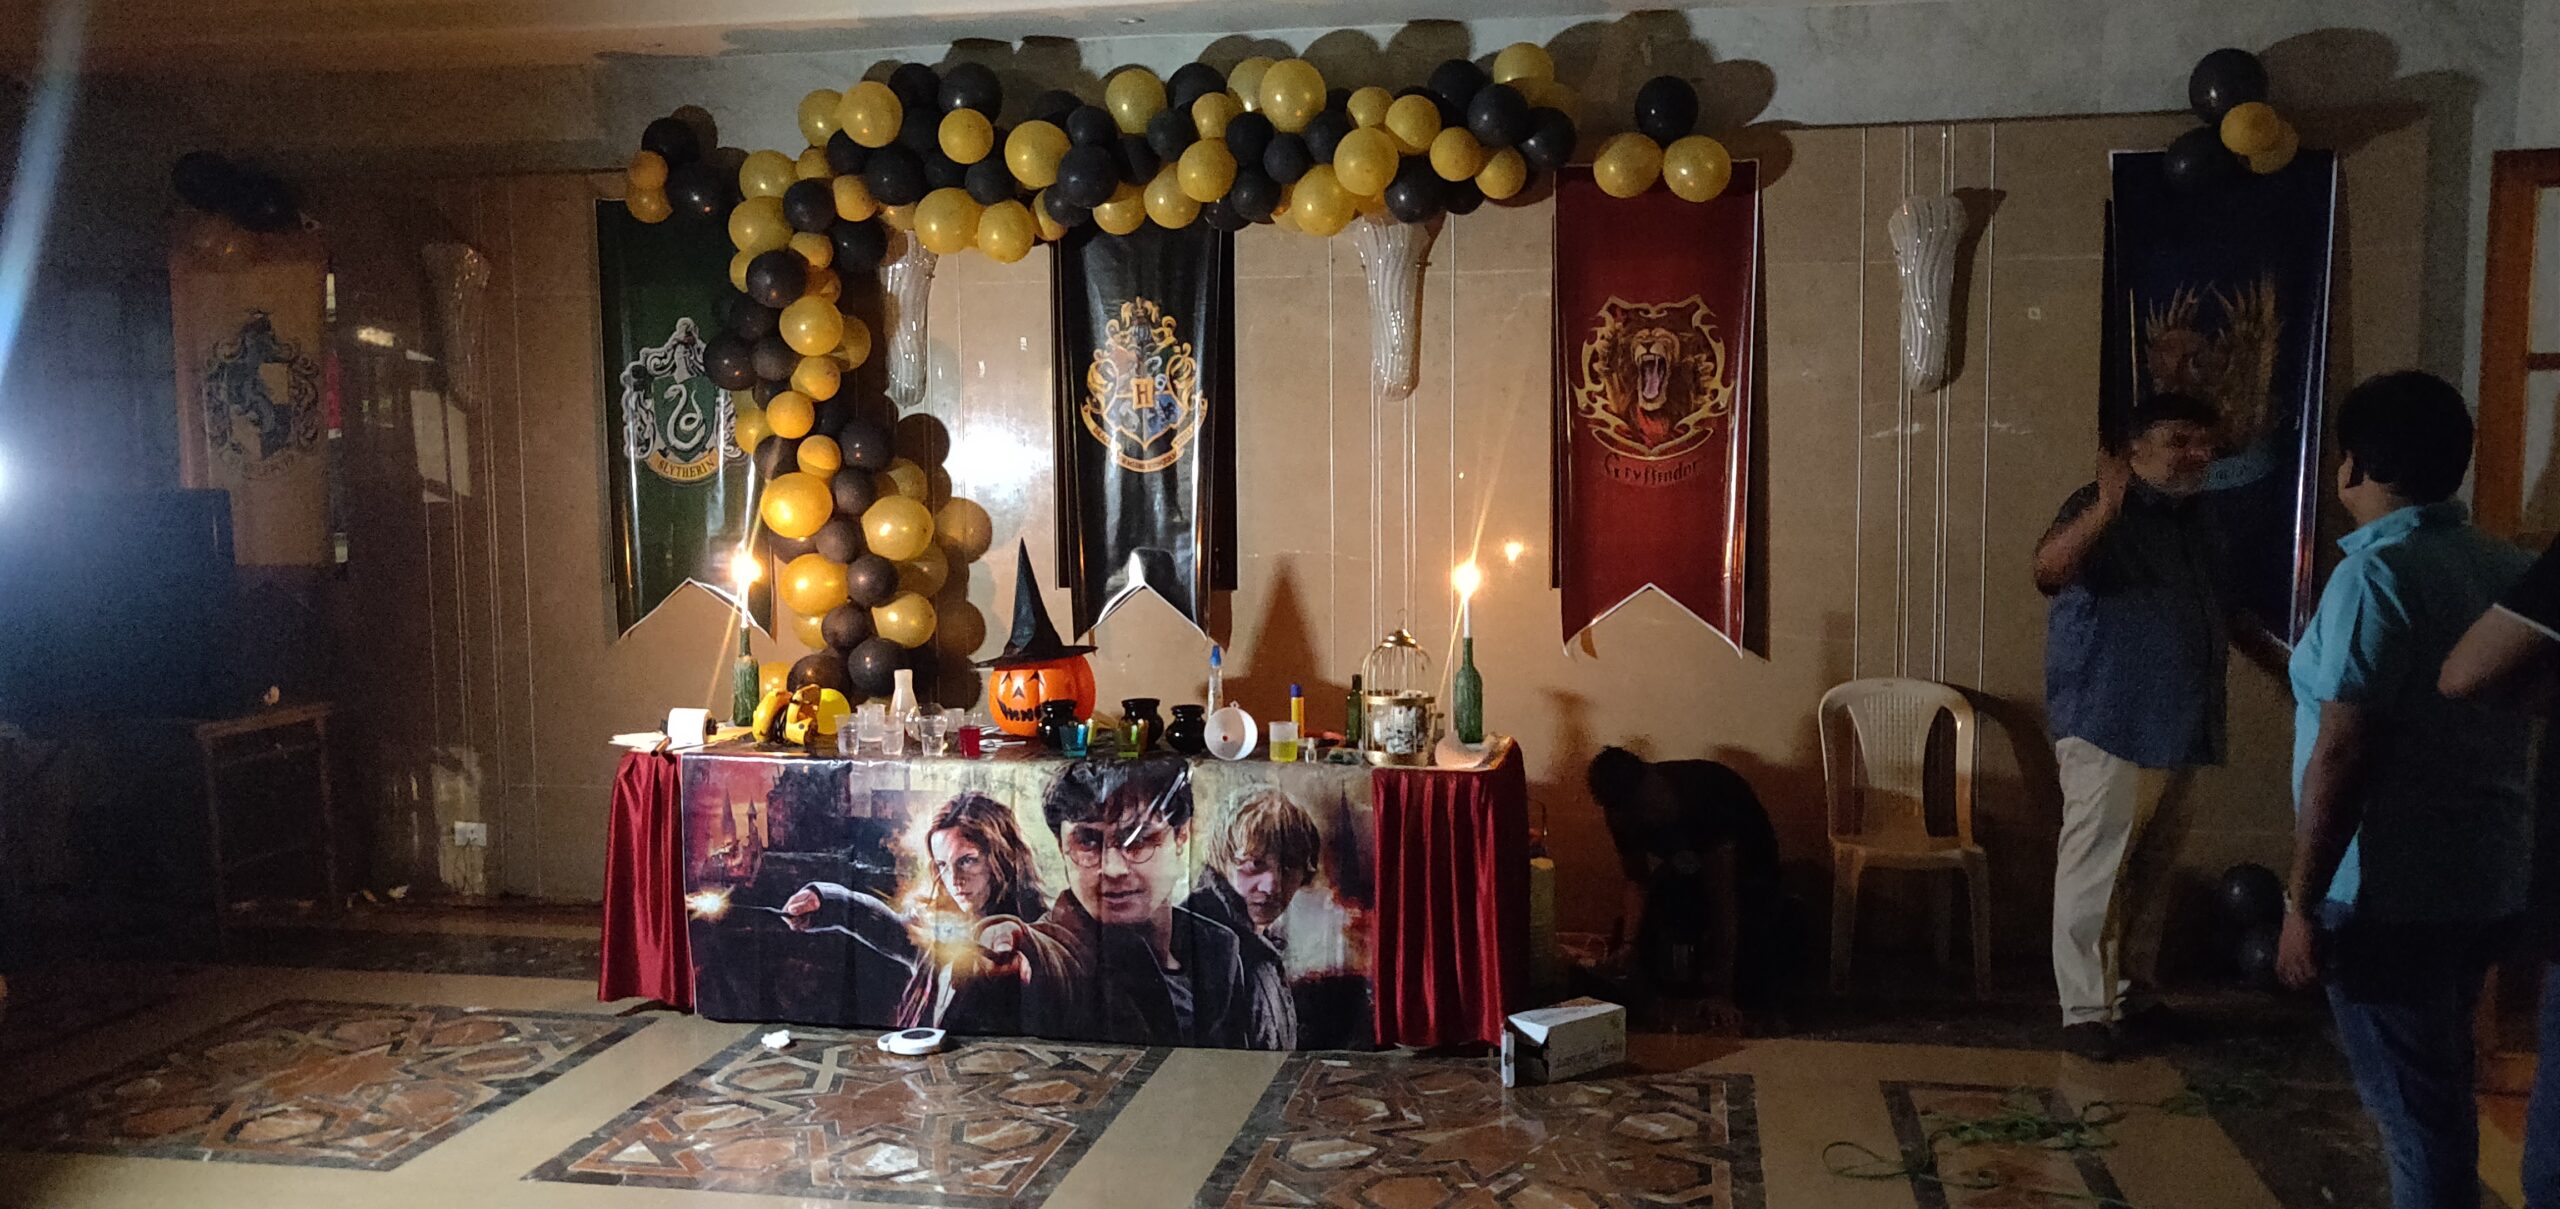 Harry Potter 2 scaled instore activations, family days, carnivals and birthdays